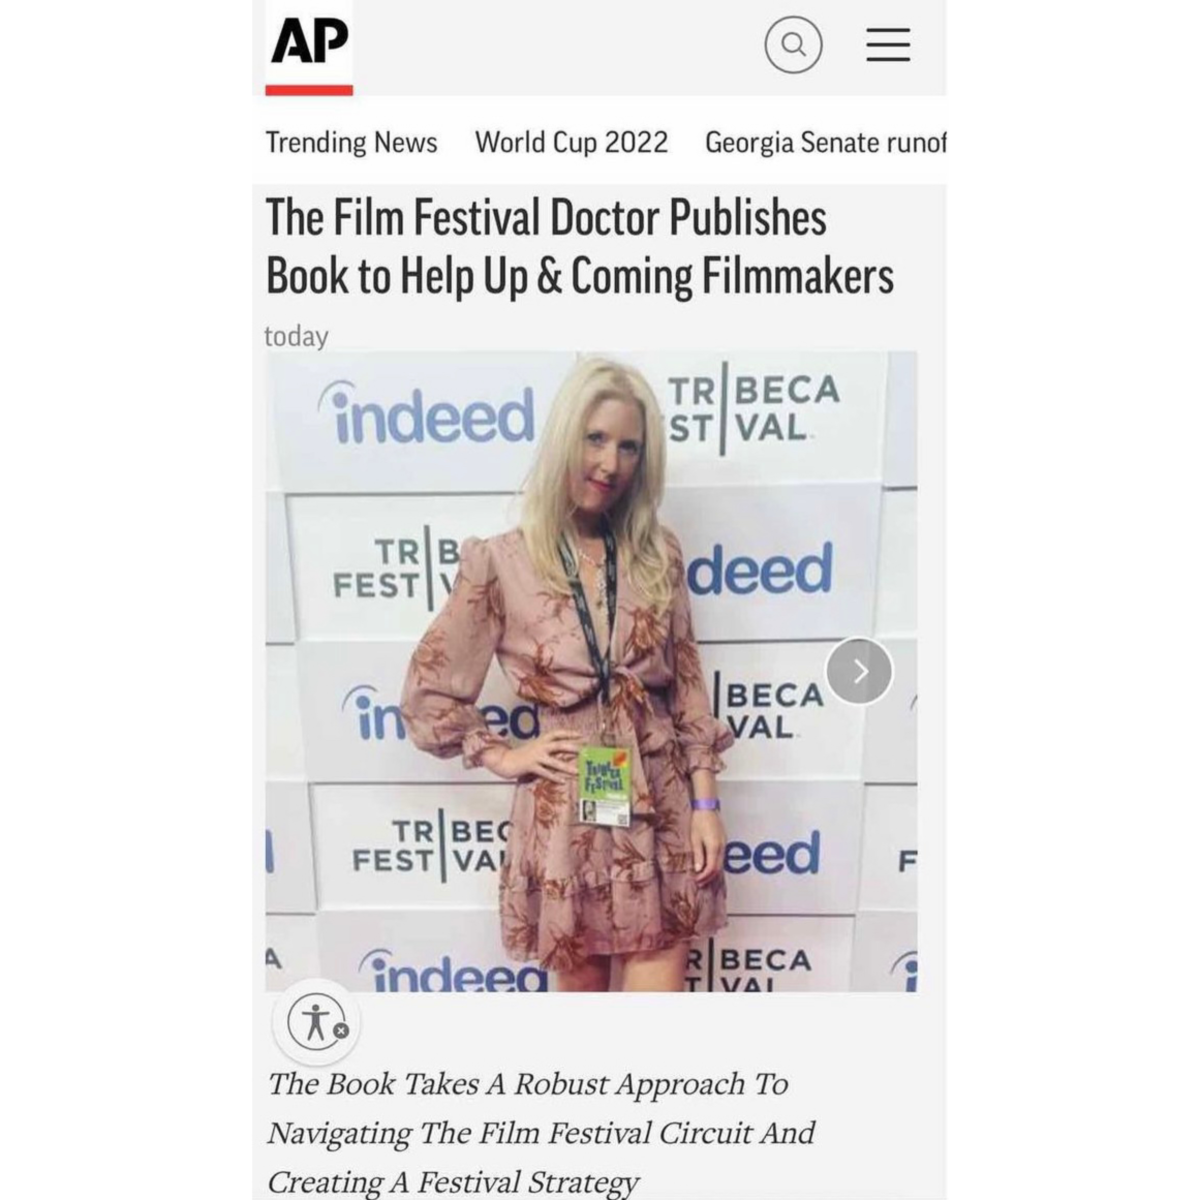 The Film Festival Doctor Publishes Book to Help Up & Coming Filmmakers